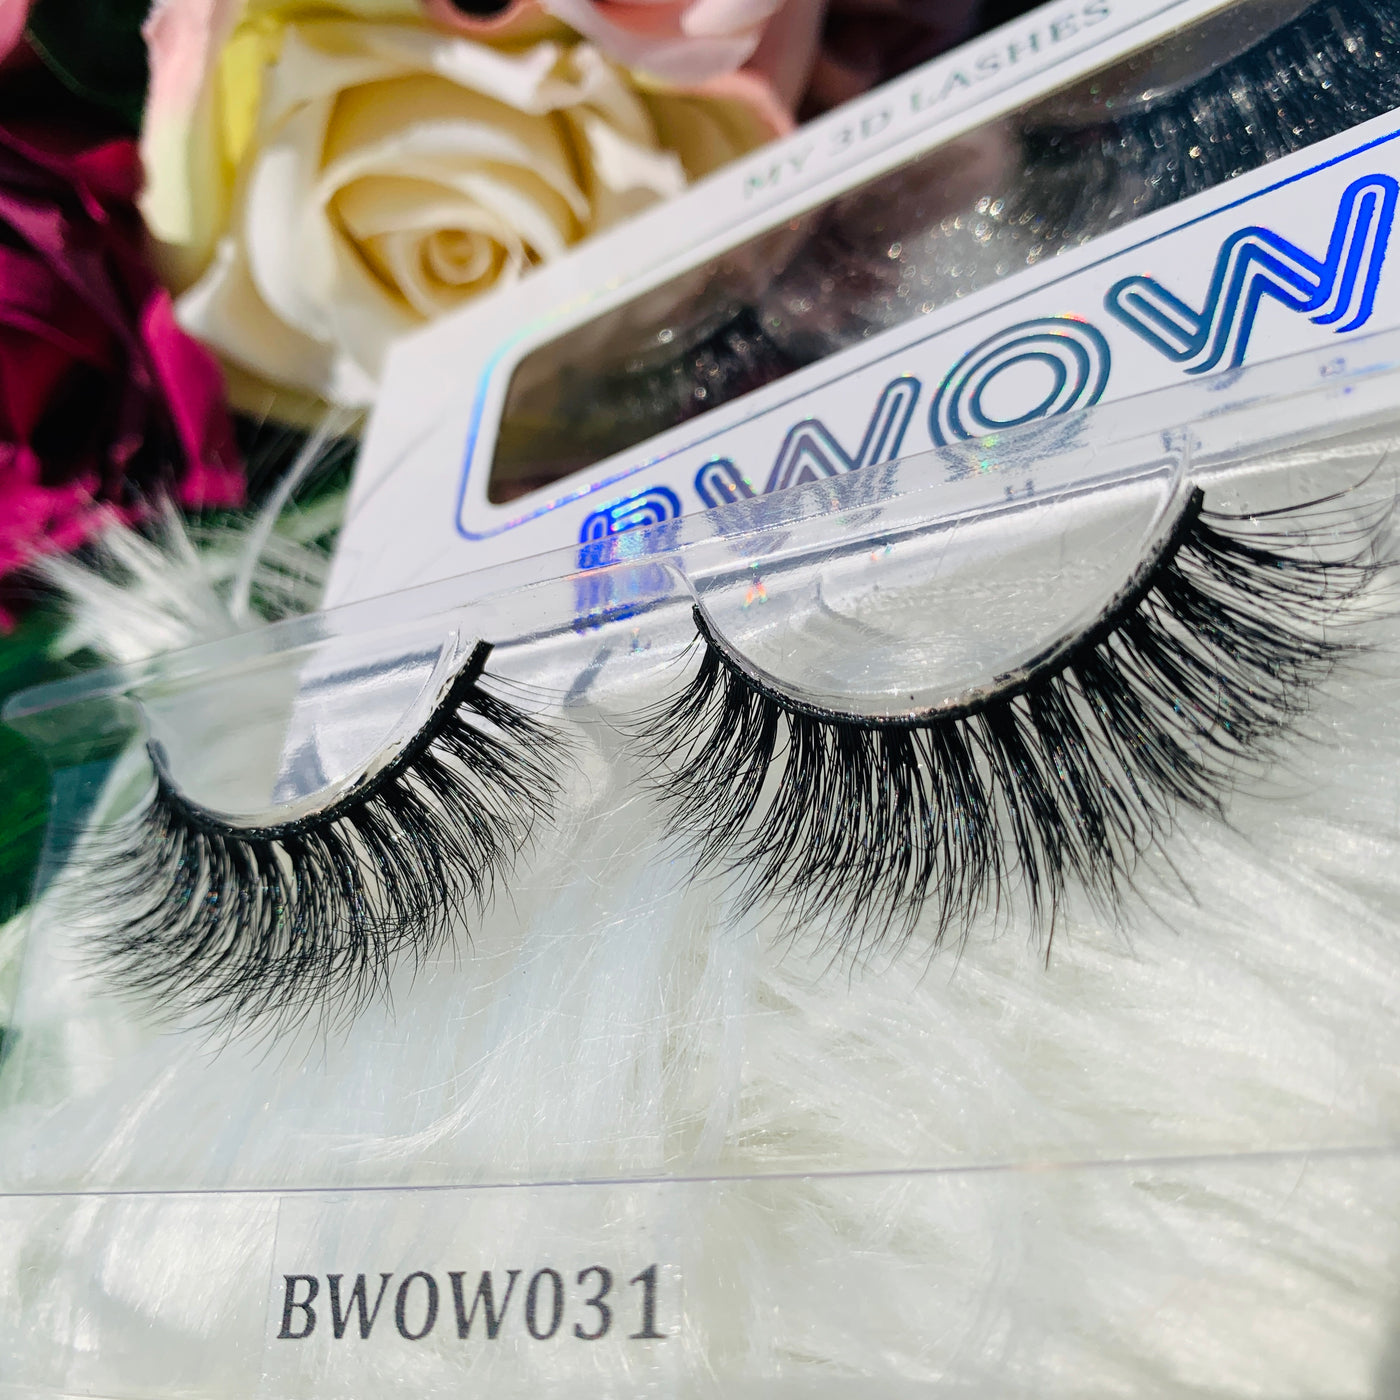 MY 3D LASHES BWOW031 - BWOW Cosmetics